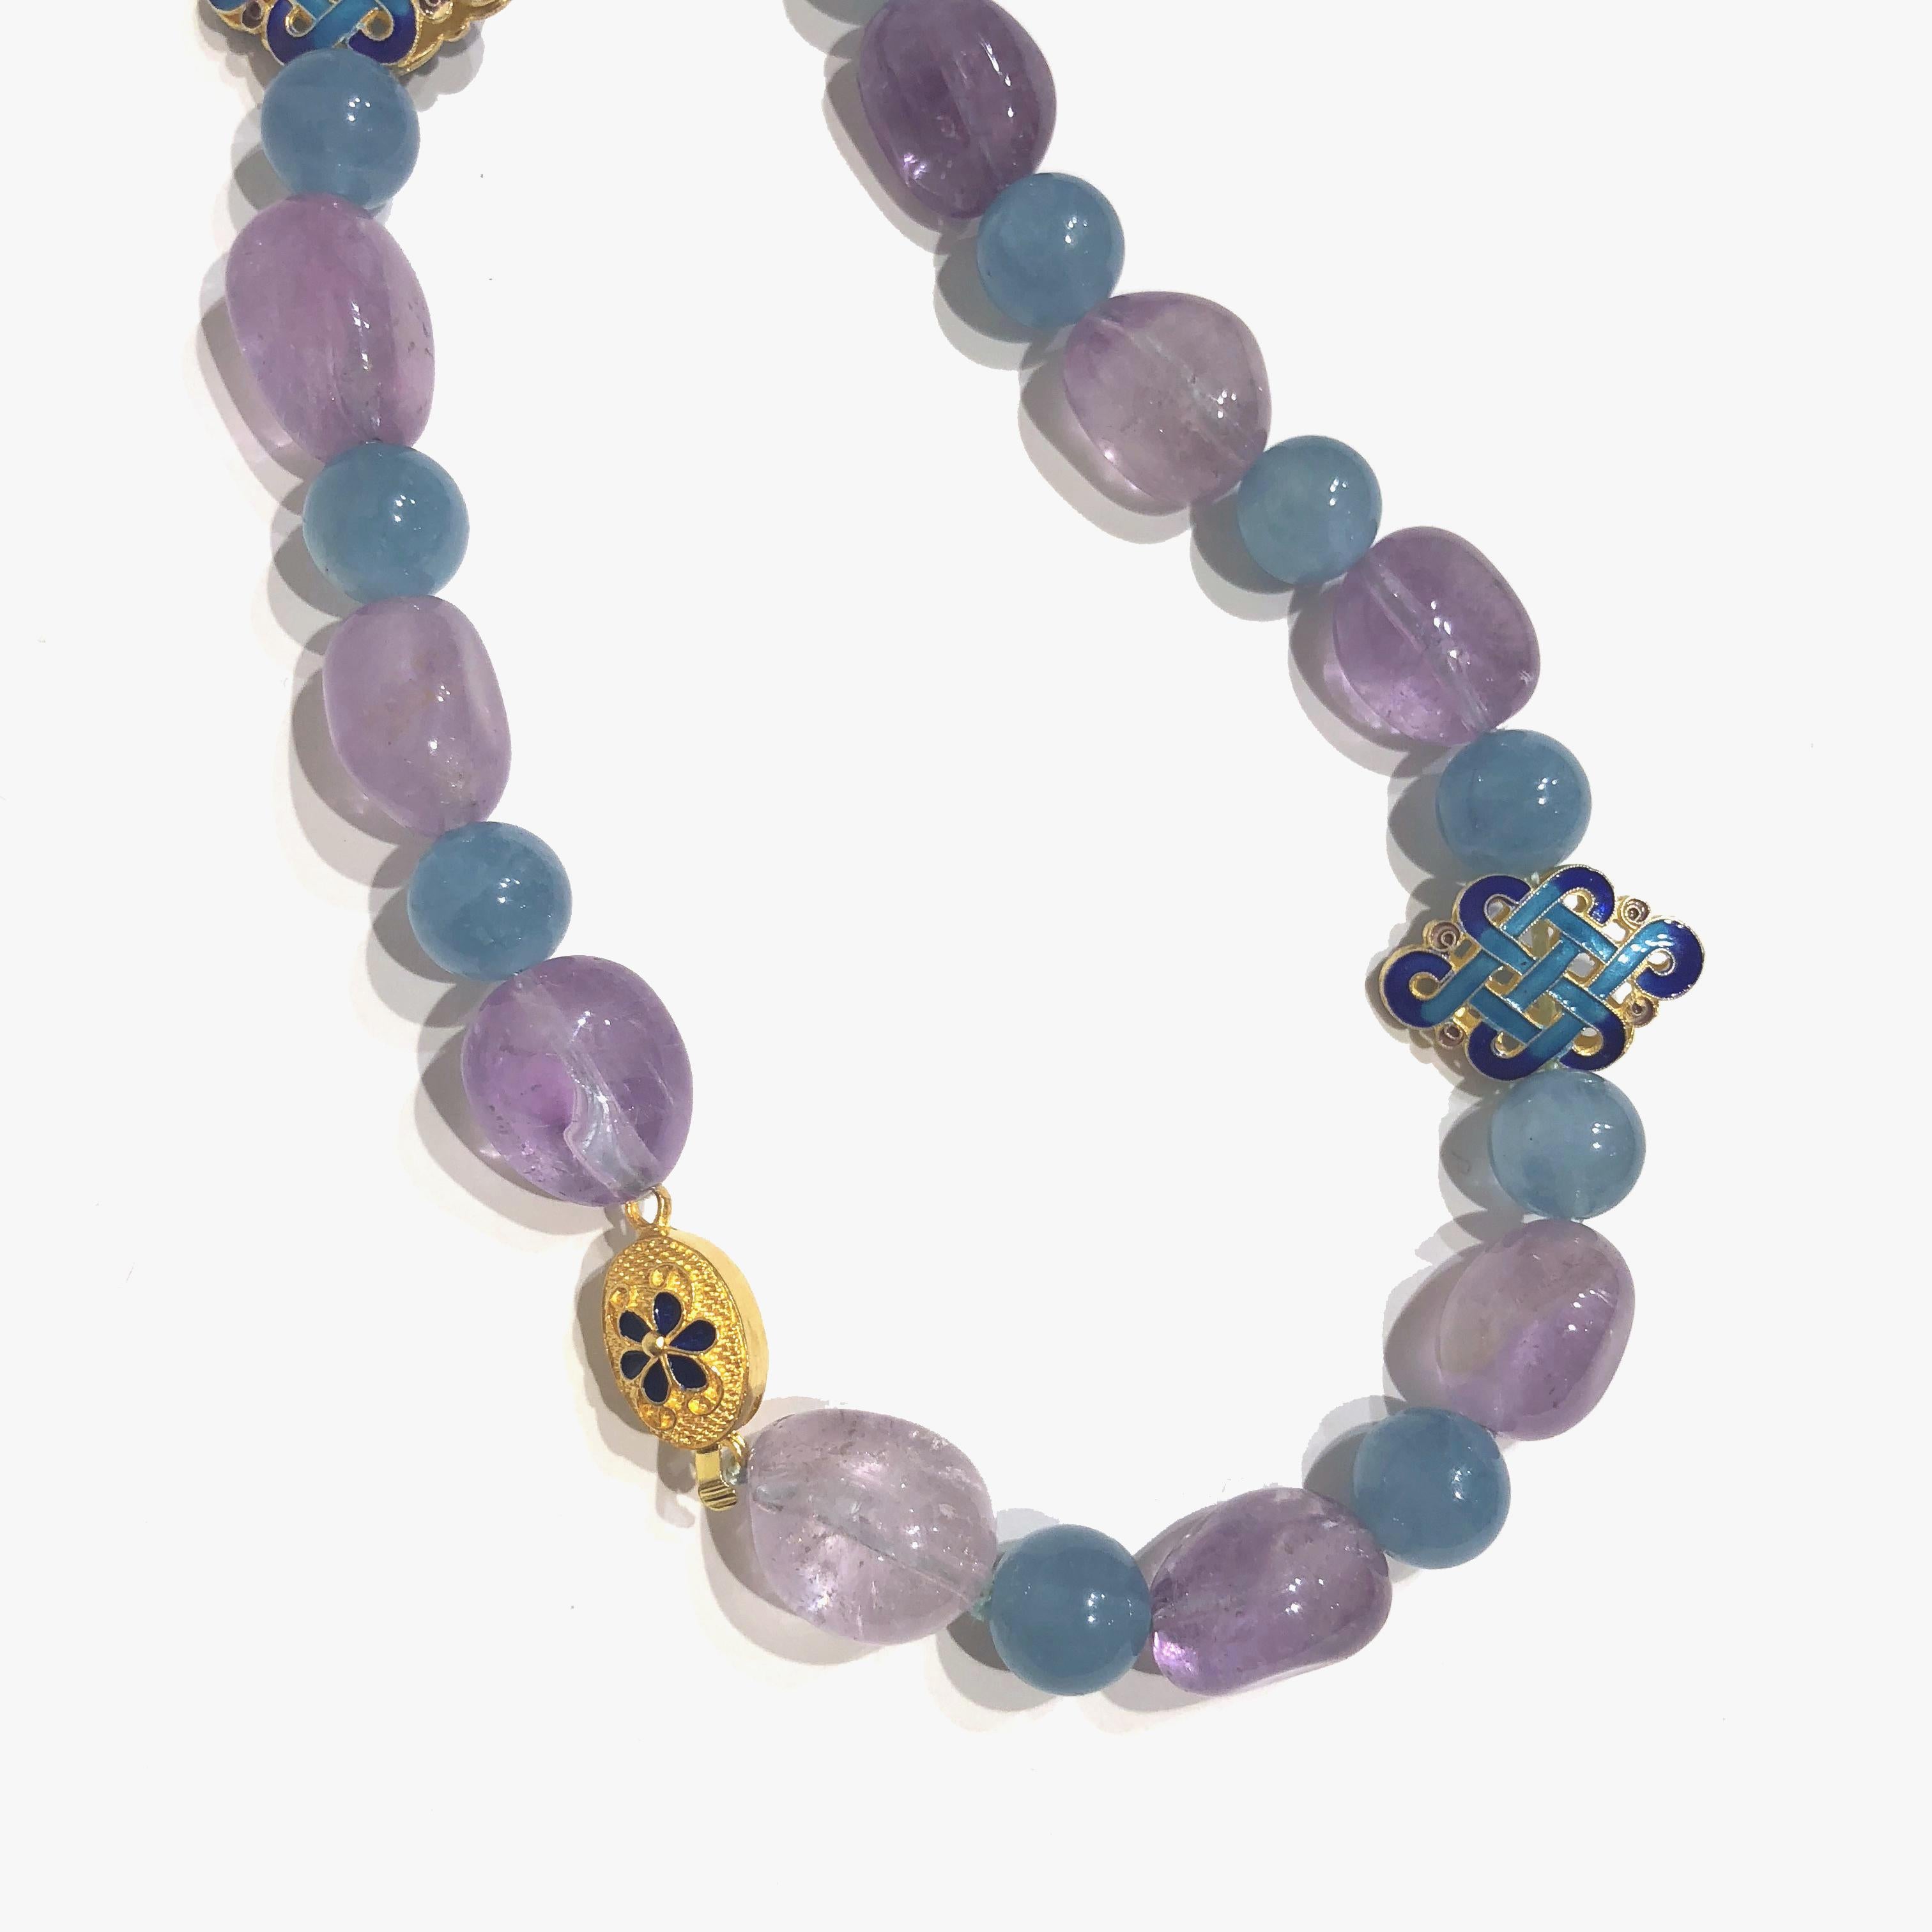 Contemporary Amethyst, Aquamarine and Vermeil Beaded Necklace